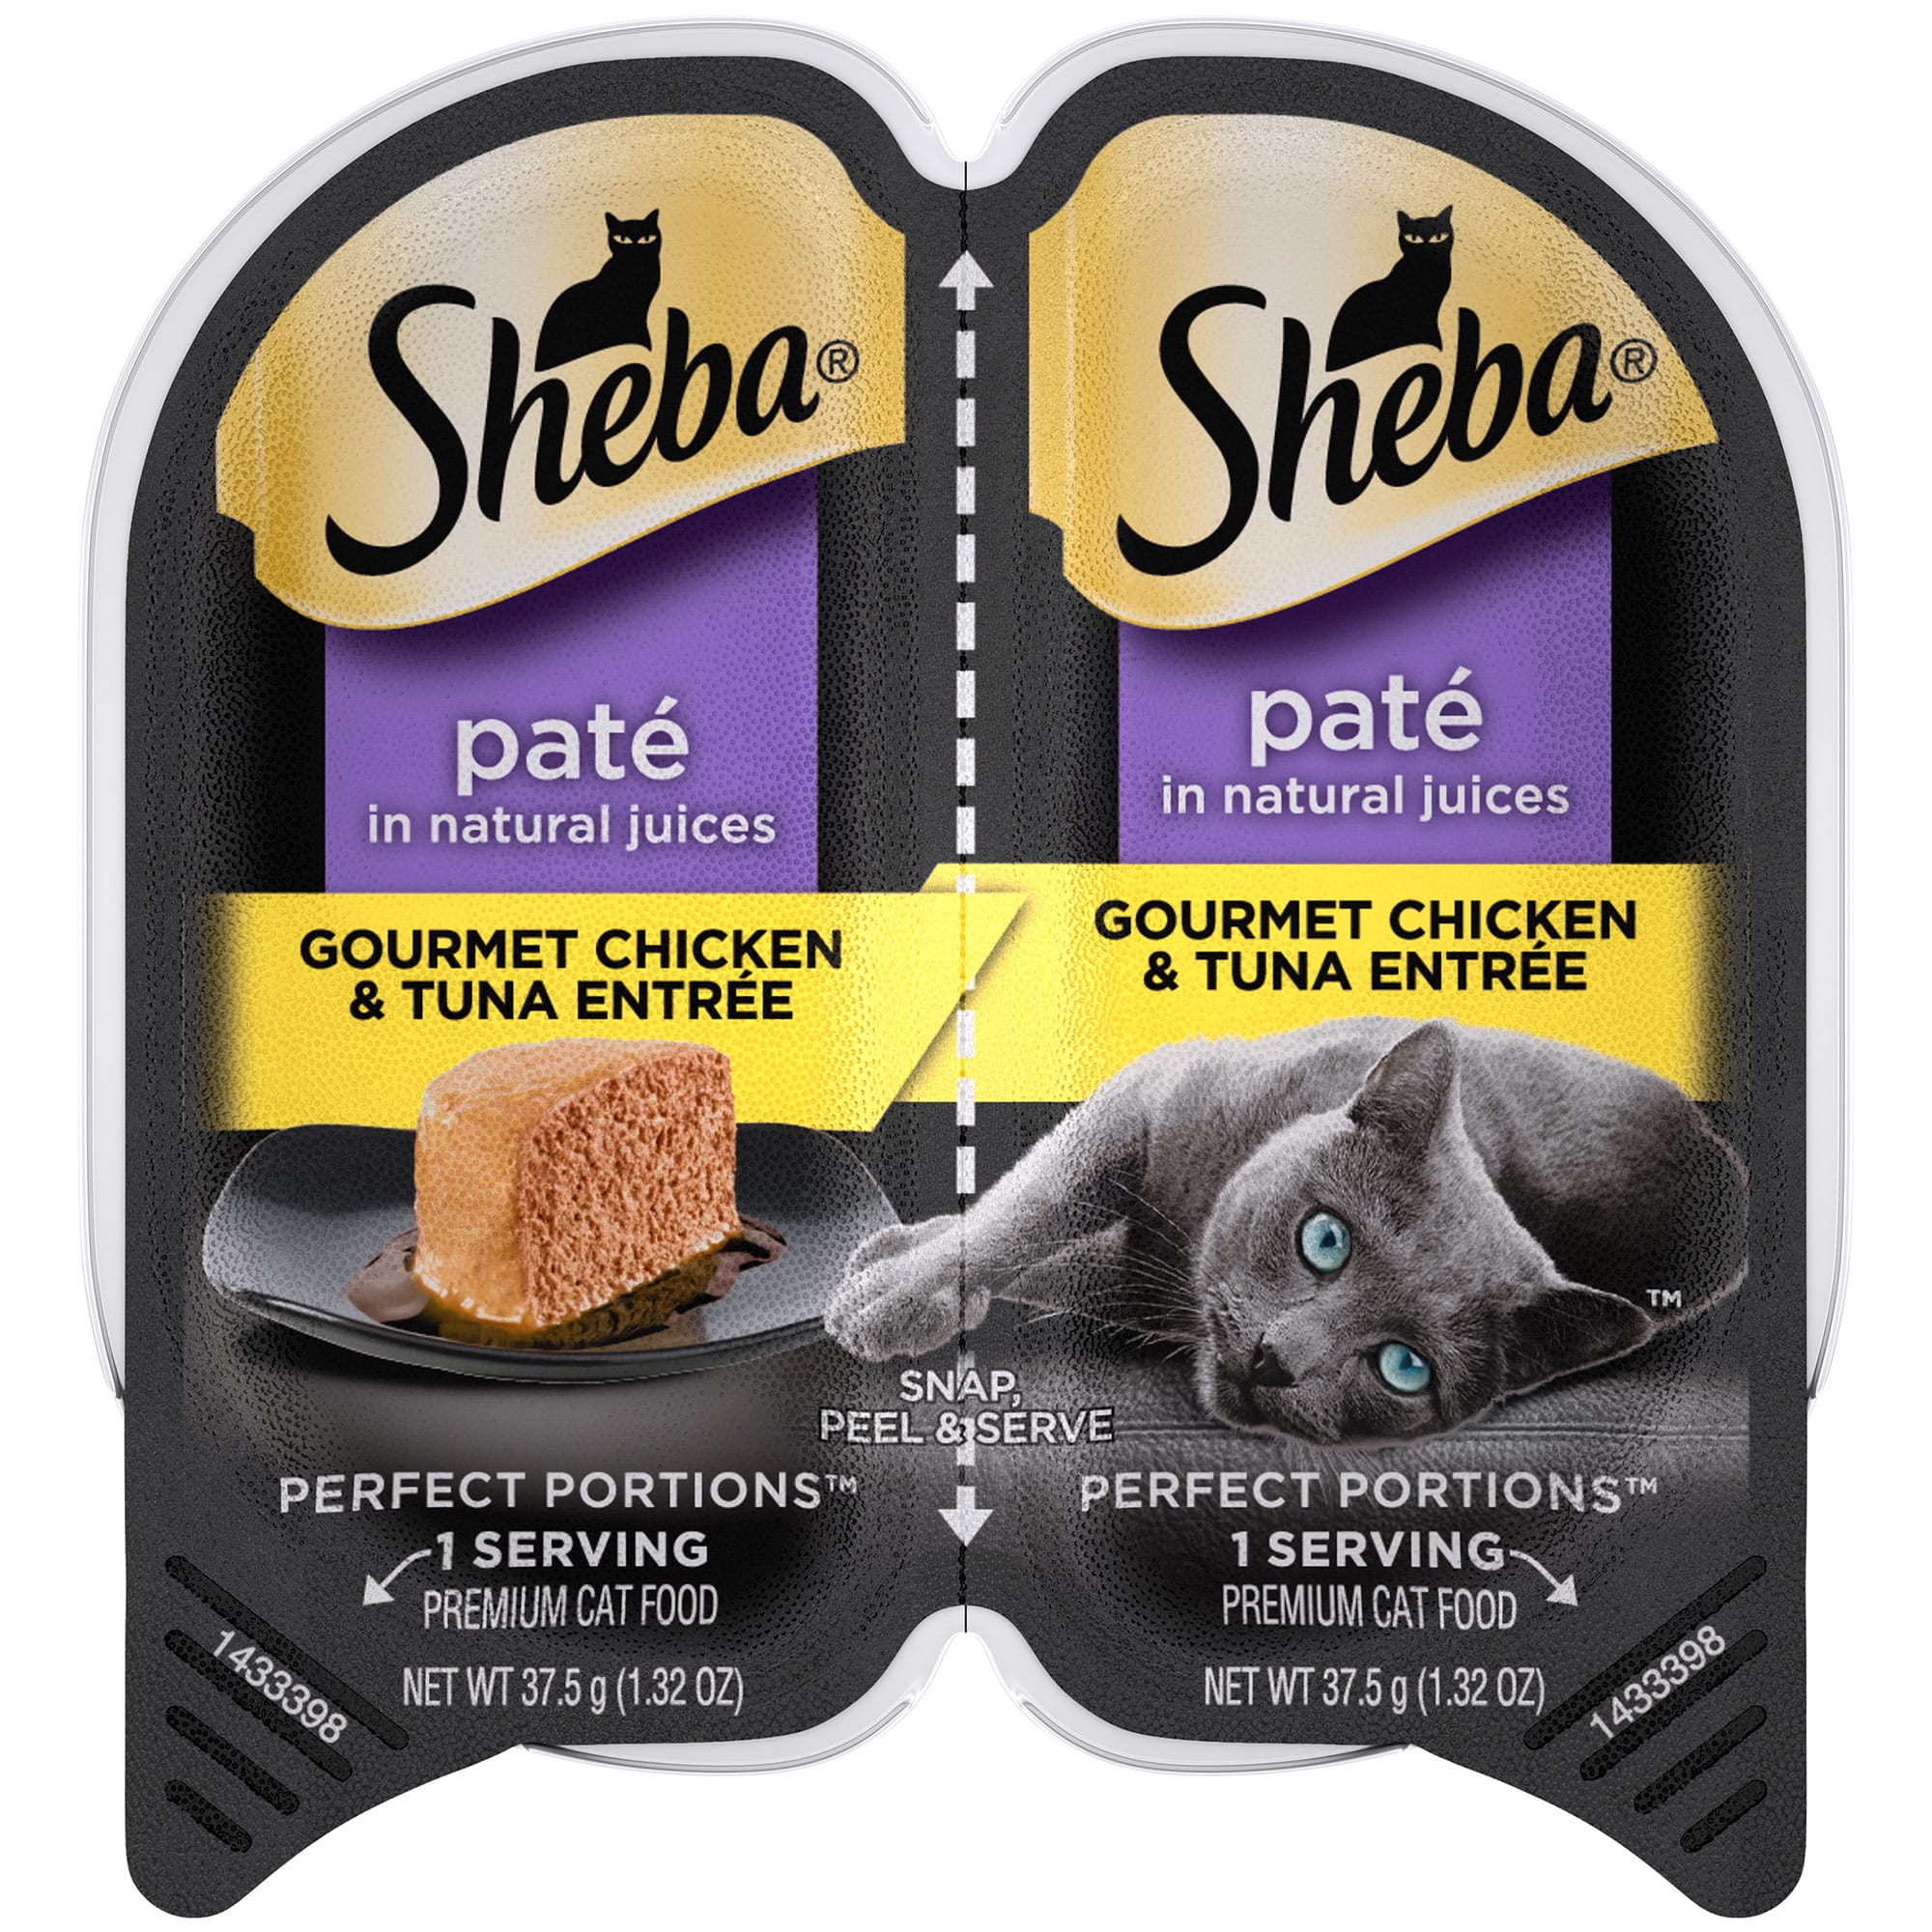 UPC 023100110233 product image for Sheba Perfect Portions Gourmet Chicken and Tuna Entree Wet Cat Food, 2.64 oz. | upcitemdb.com